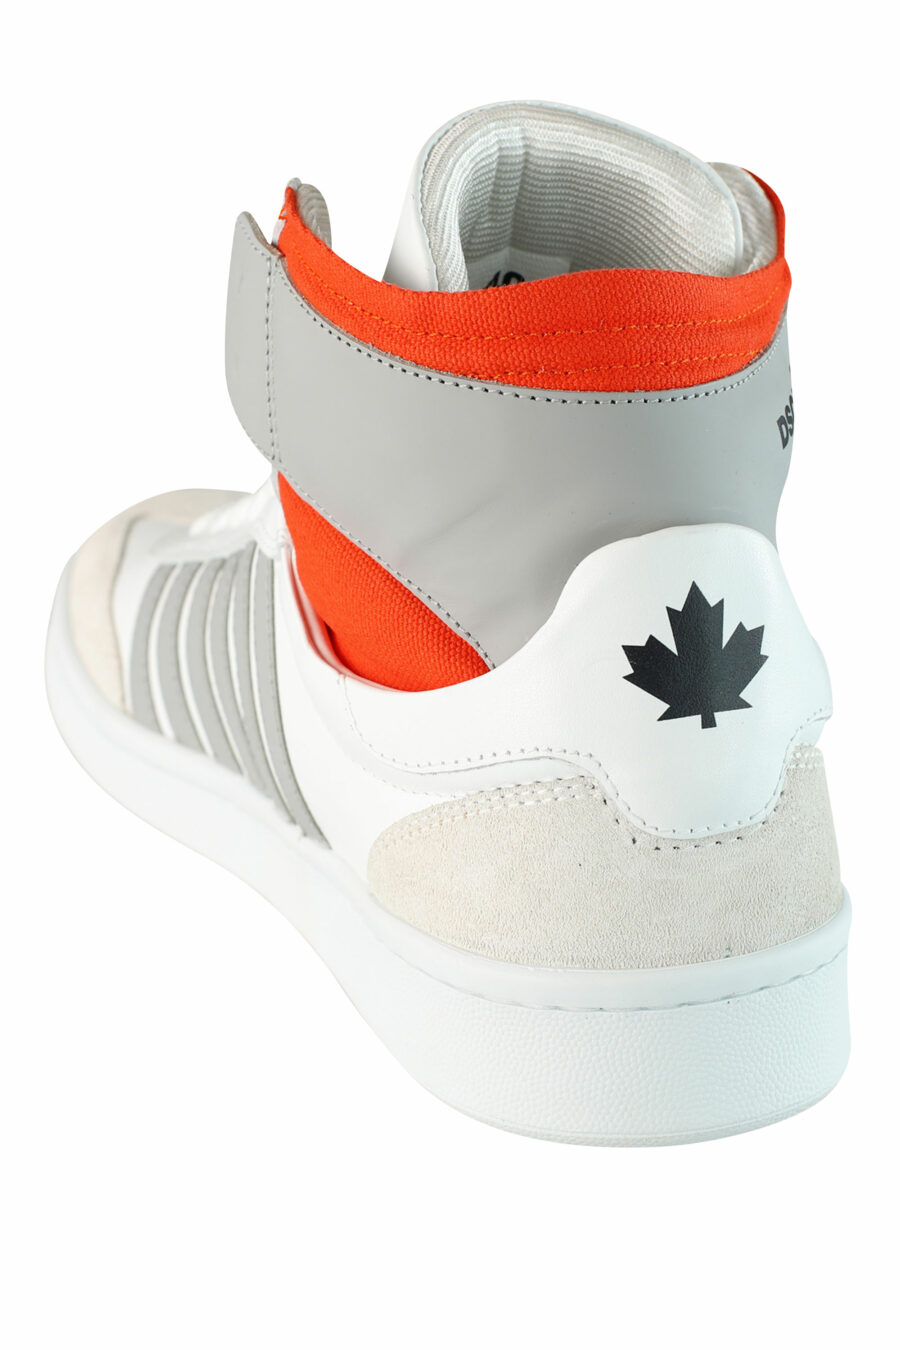 White mixed "boxer" bootie style trainers with orange and grey details - IMG 1504